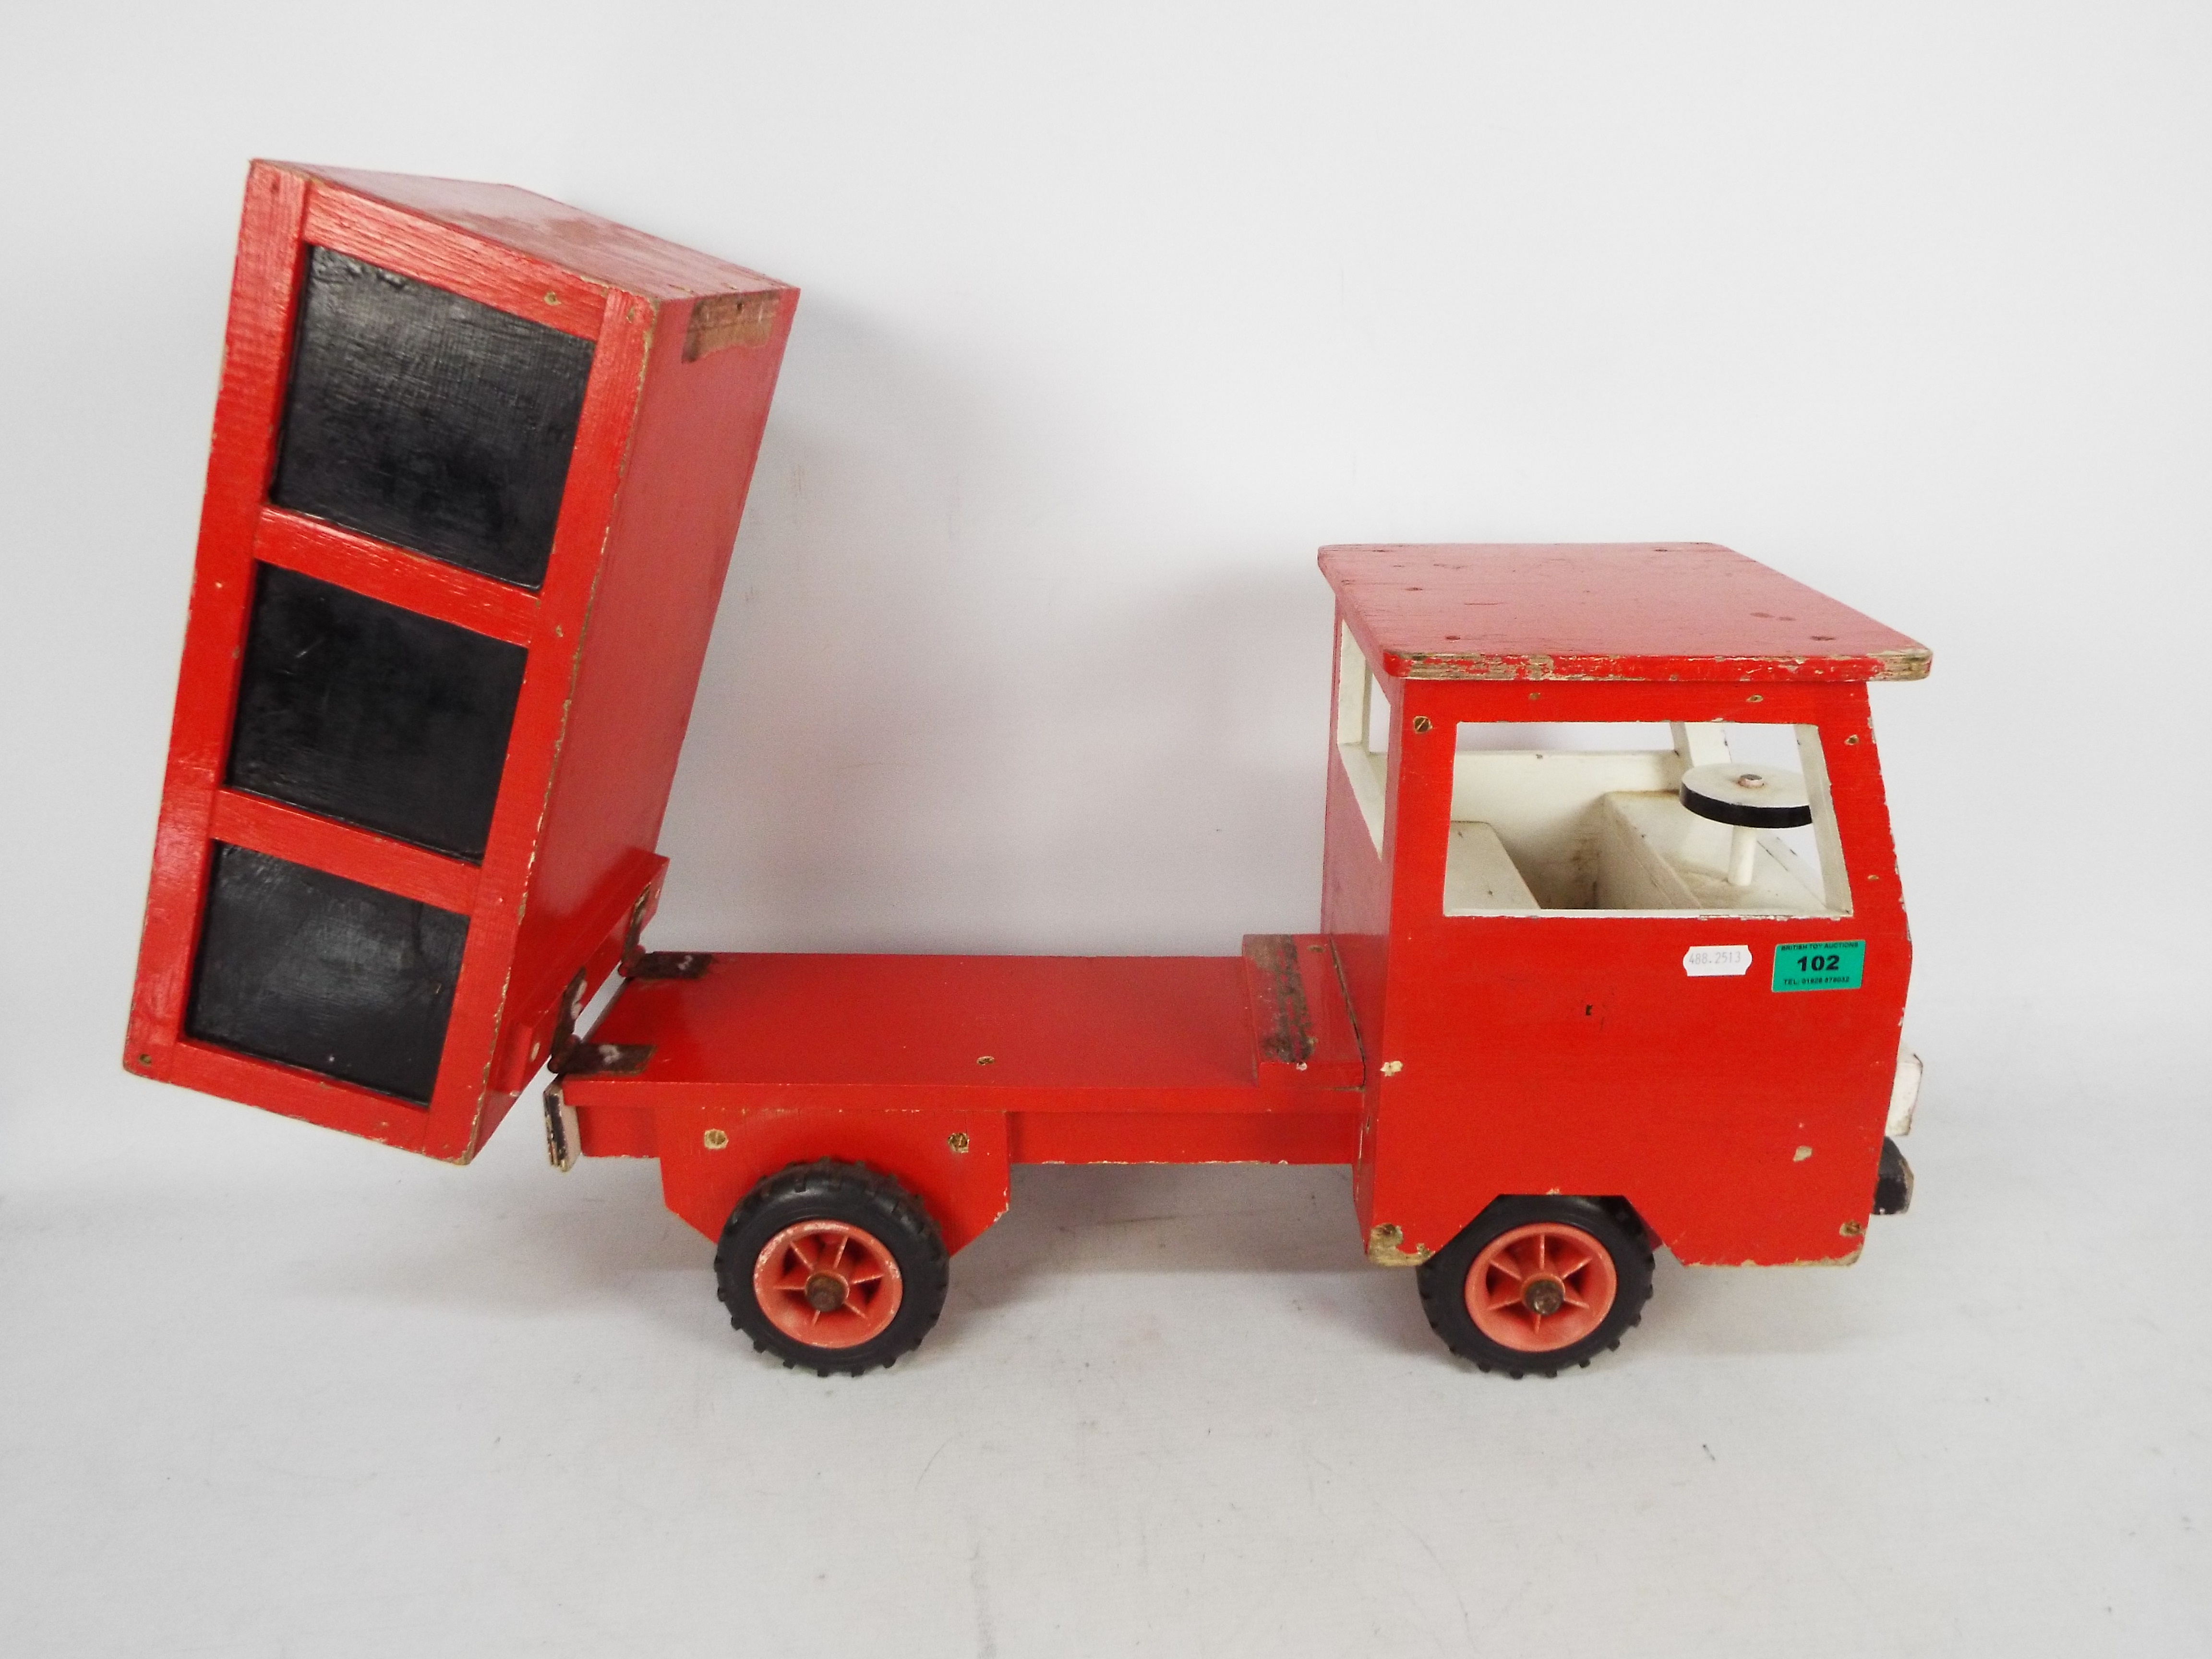 A vintage hand-made wooden tipper truck painted red with black panels and white driver's cab, - Image 3 of 5